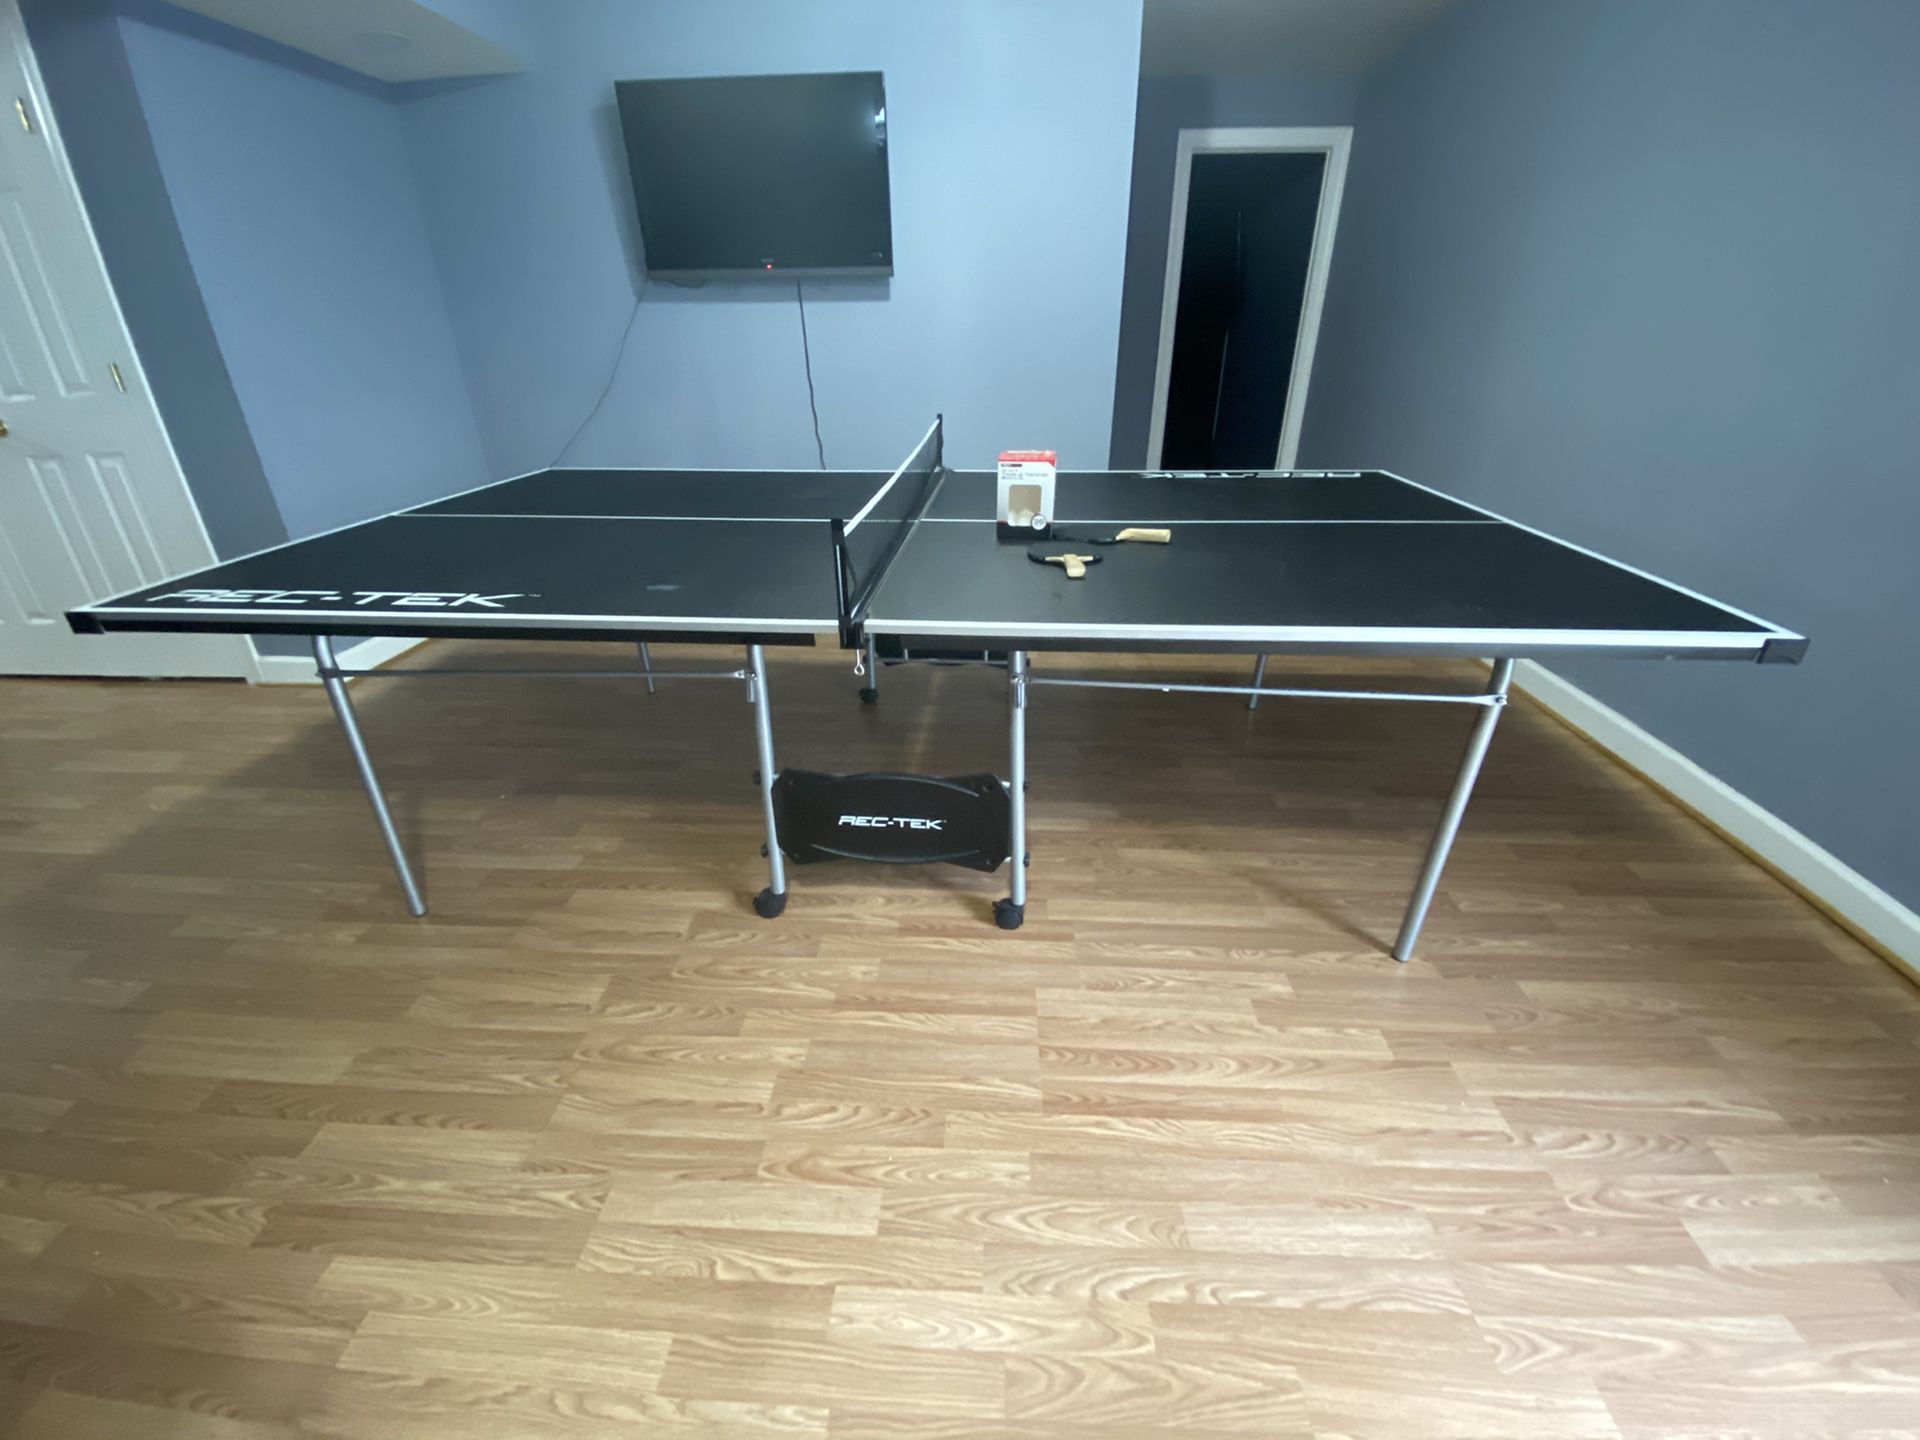 New Ping Pong/Table Tennis Table